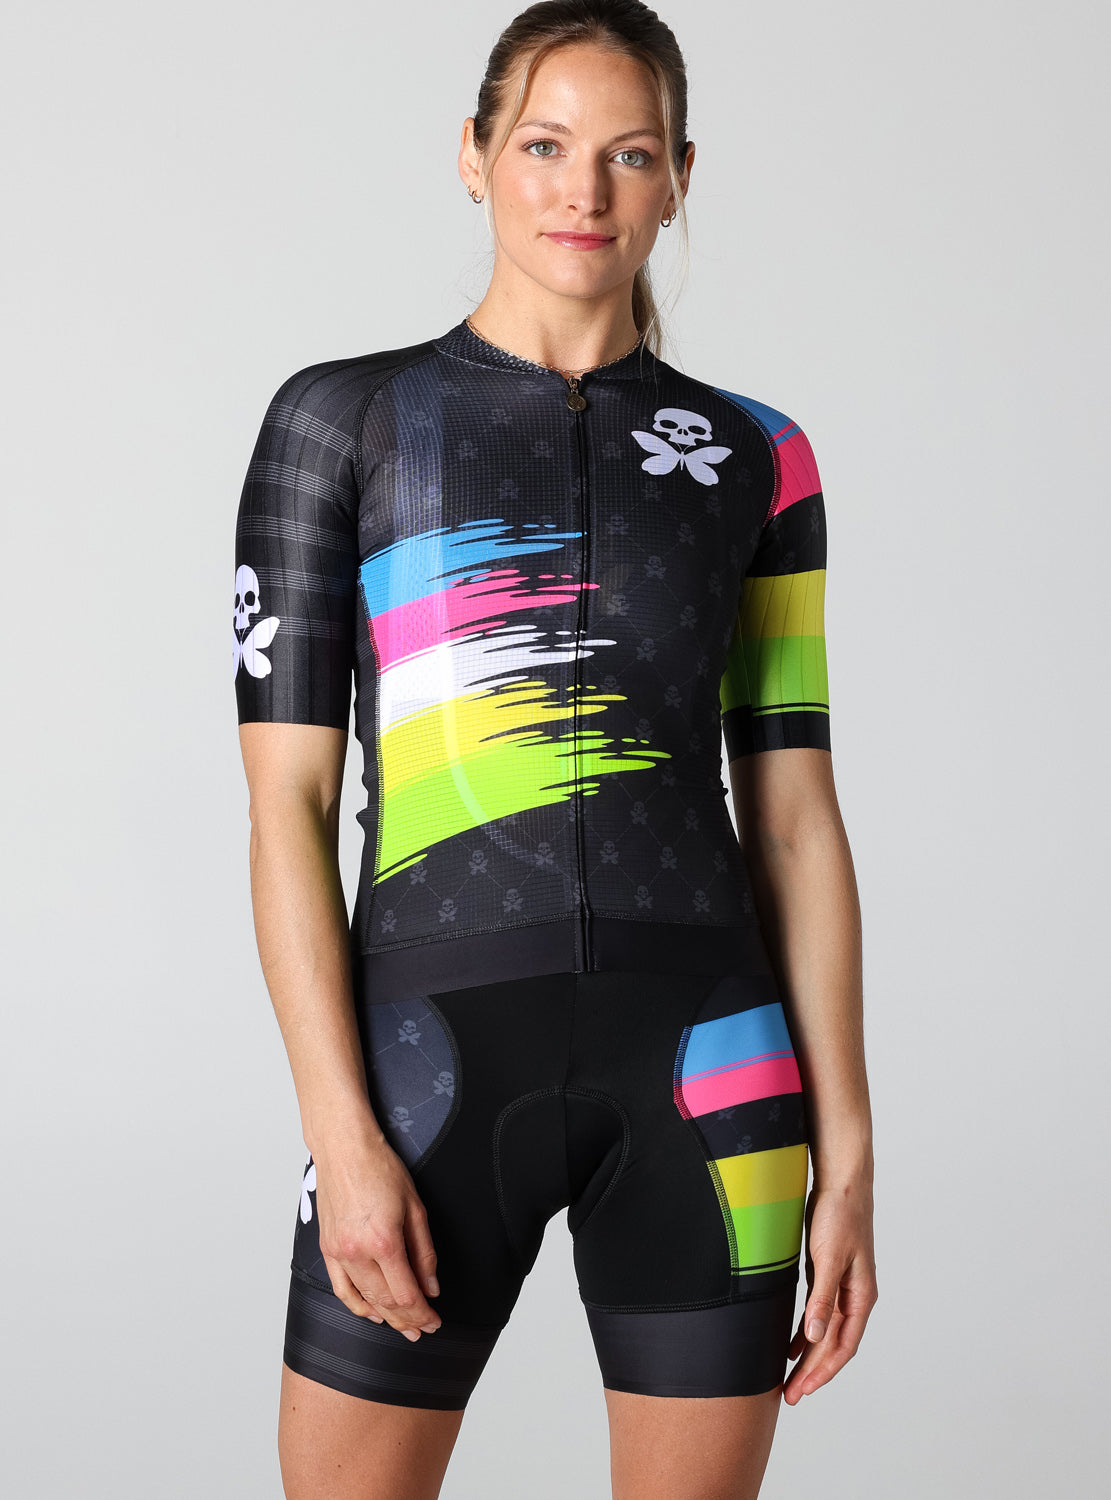 betty designs world champs cycle jersey and shorts for women